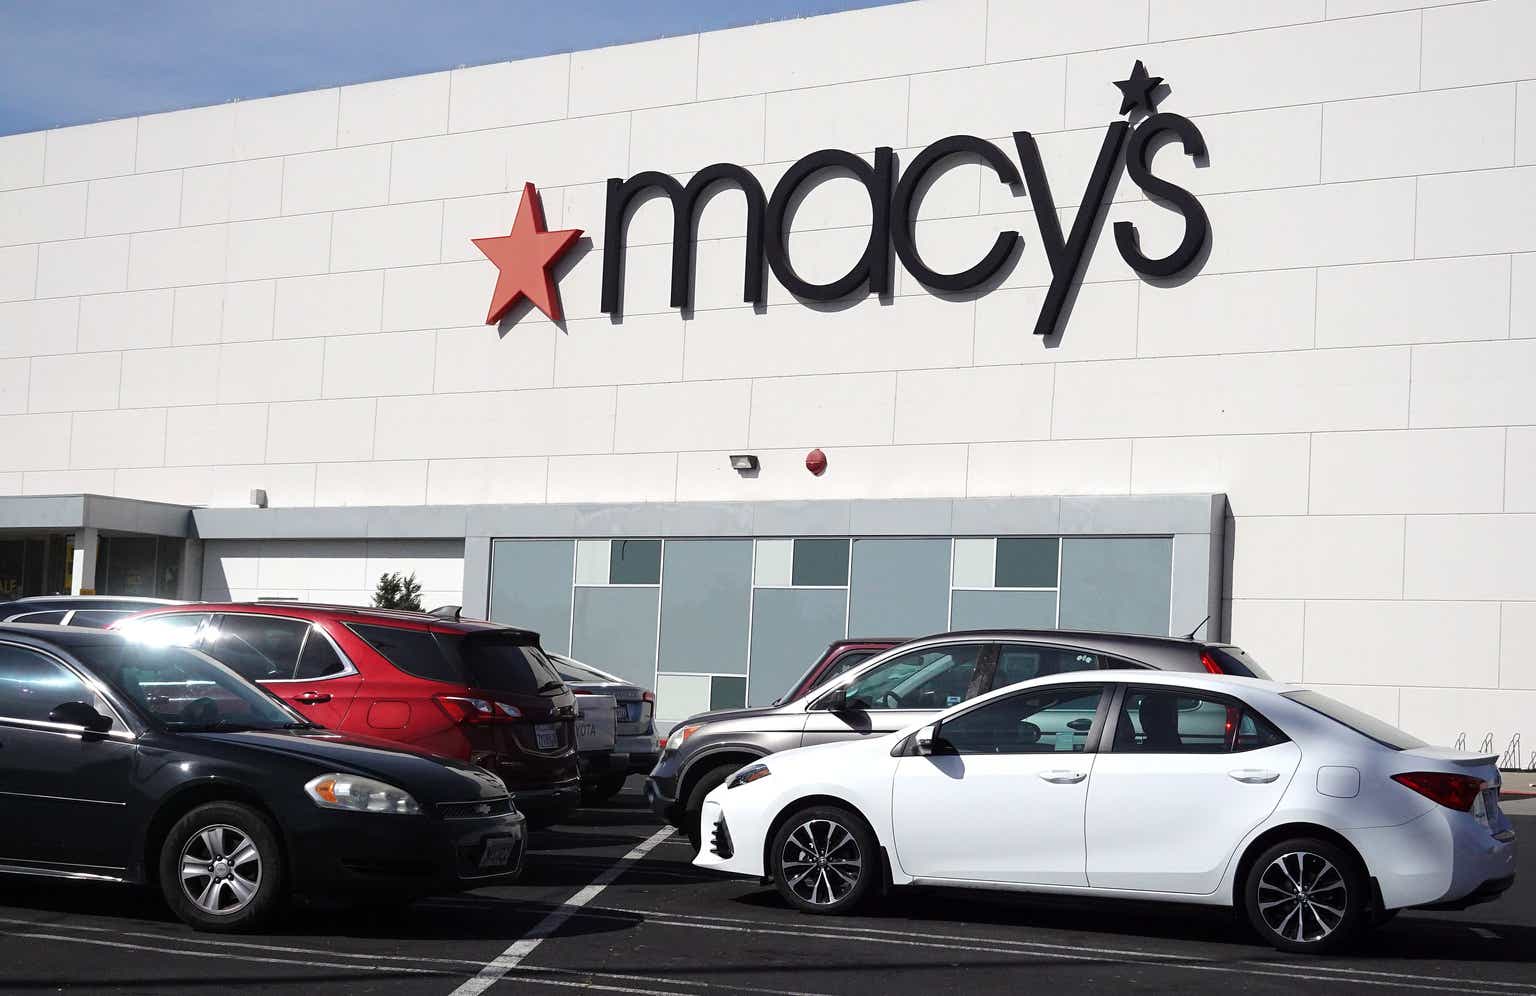 Premium Macy's Clothing Lots - Exclusive Reseller Opportunity